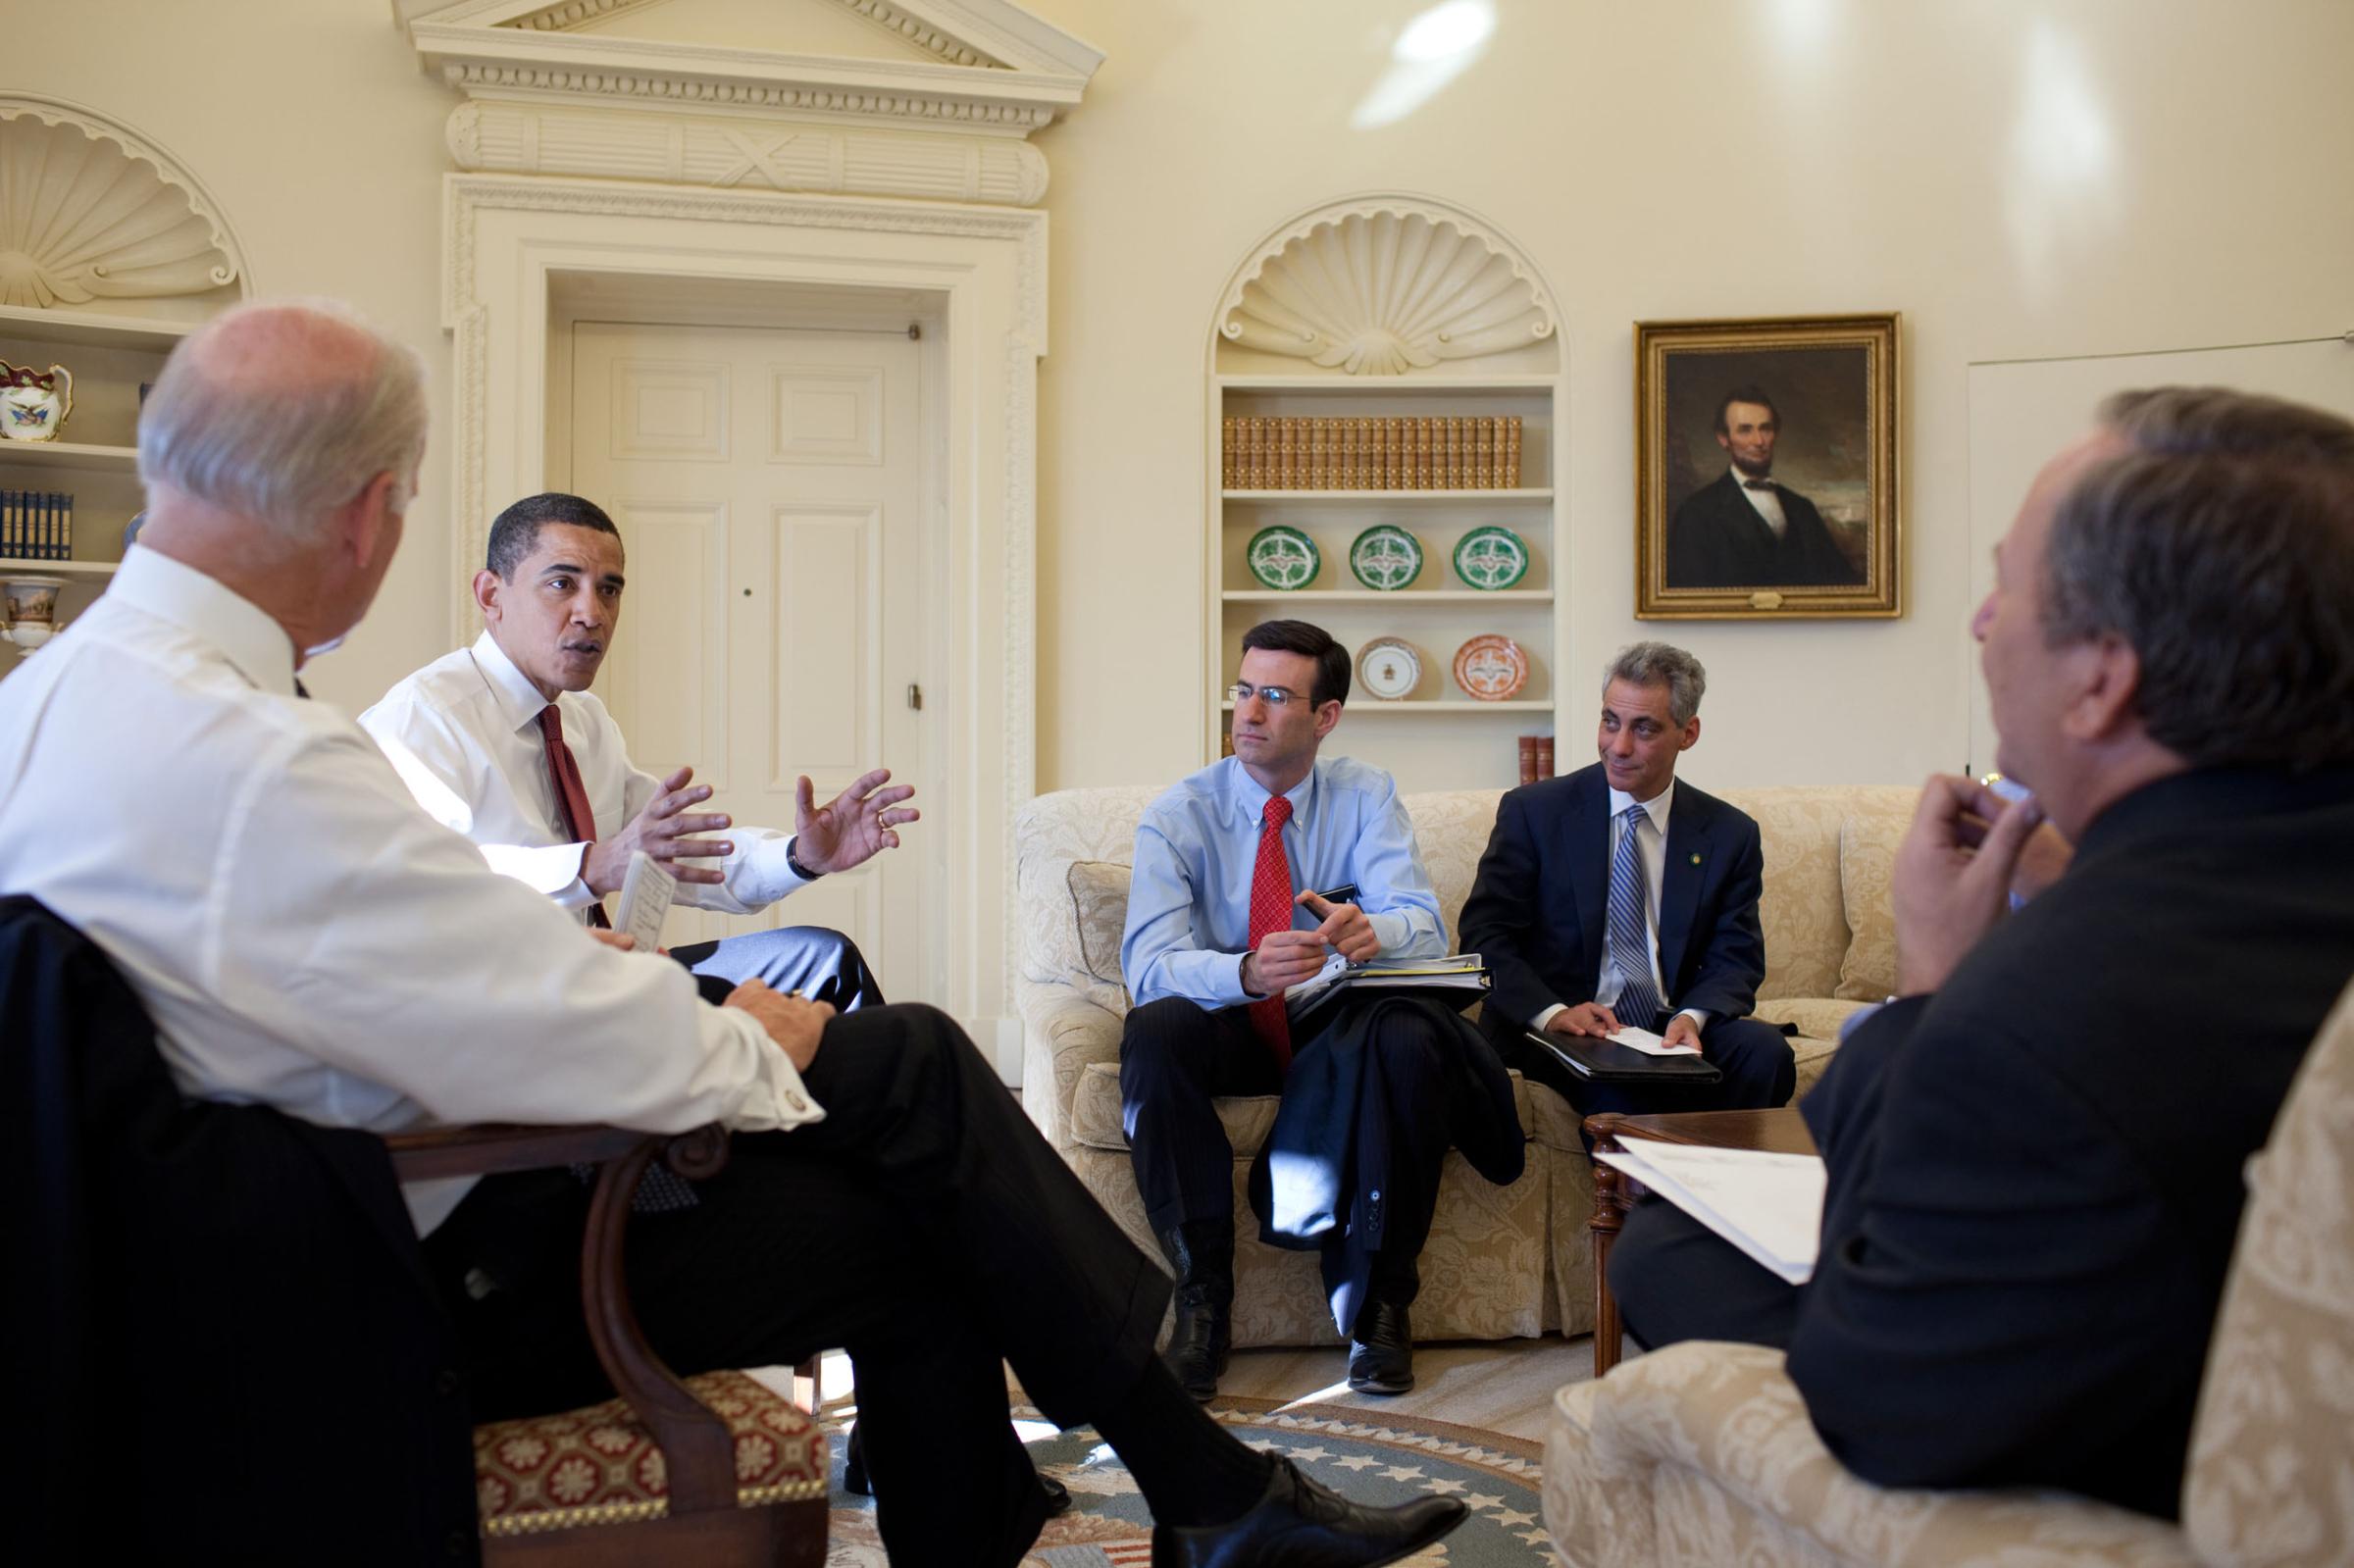 President Barack Obama at the Daily Economic Briefing in the Oval Office with VP Joe Biden, OMB Director Peter Orszag, Chief of Staff Rahm Emanuel and Director of the National Economic Council Larry Summers on Jan. 22, 2009.